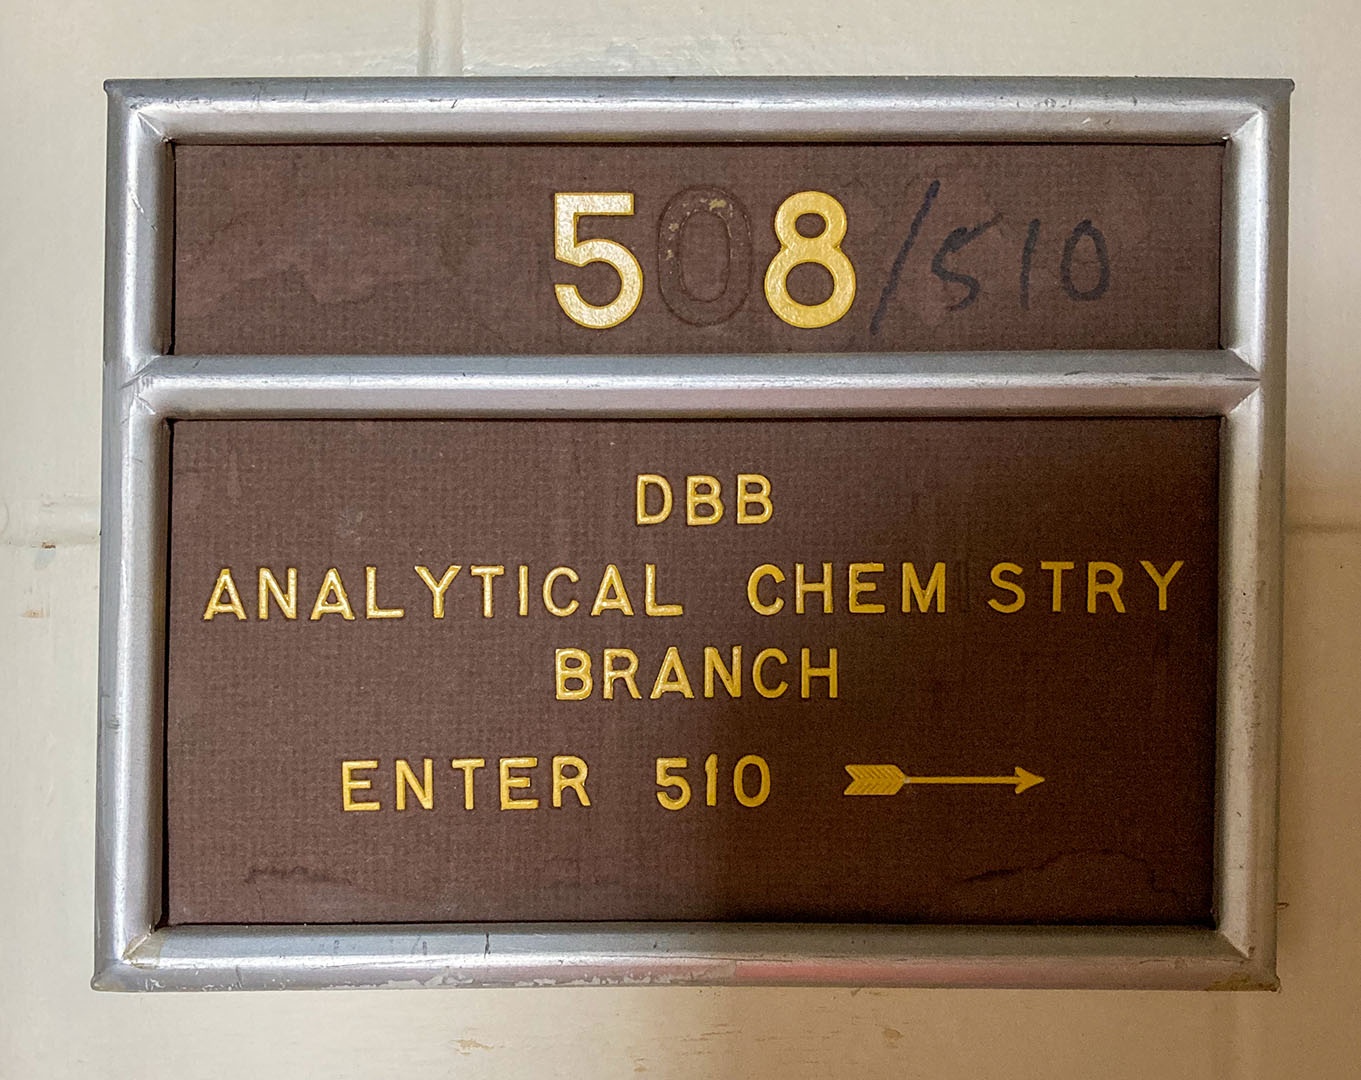 A yellow and brown sign with room number 508 and DBS analytical chemistry branch on it, in an aluminum rectangular holder